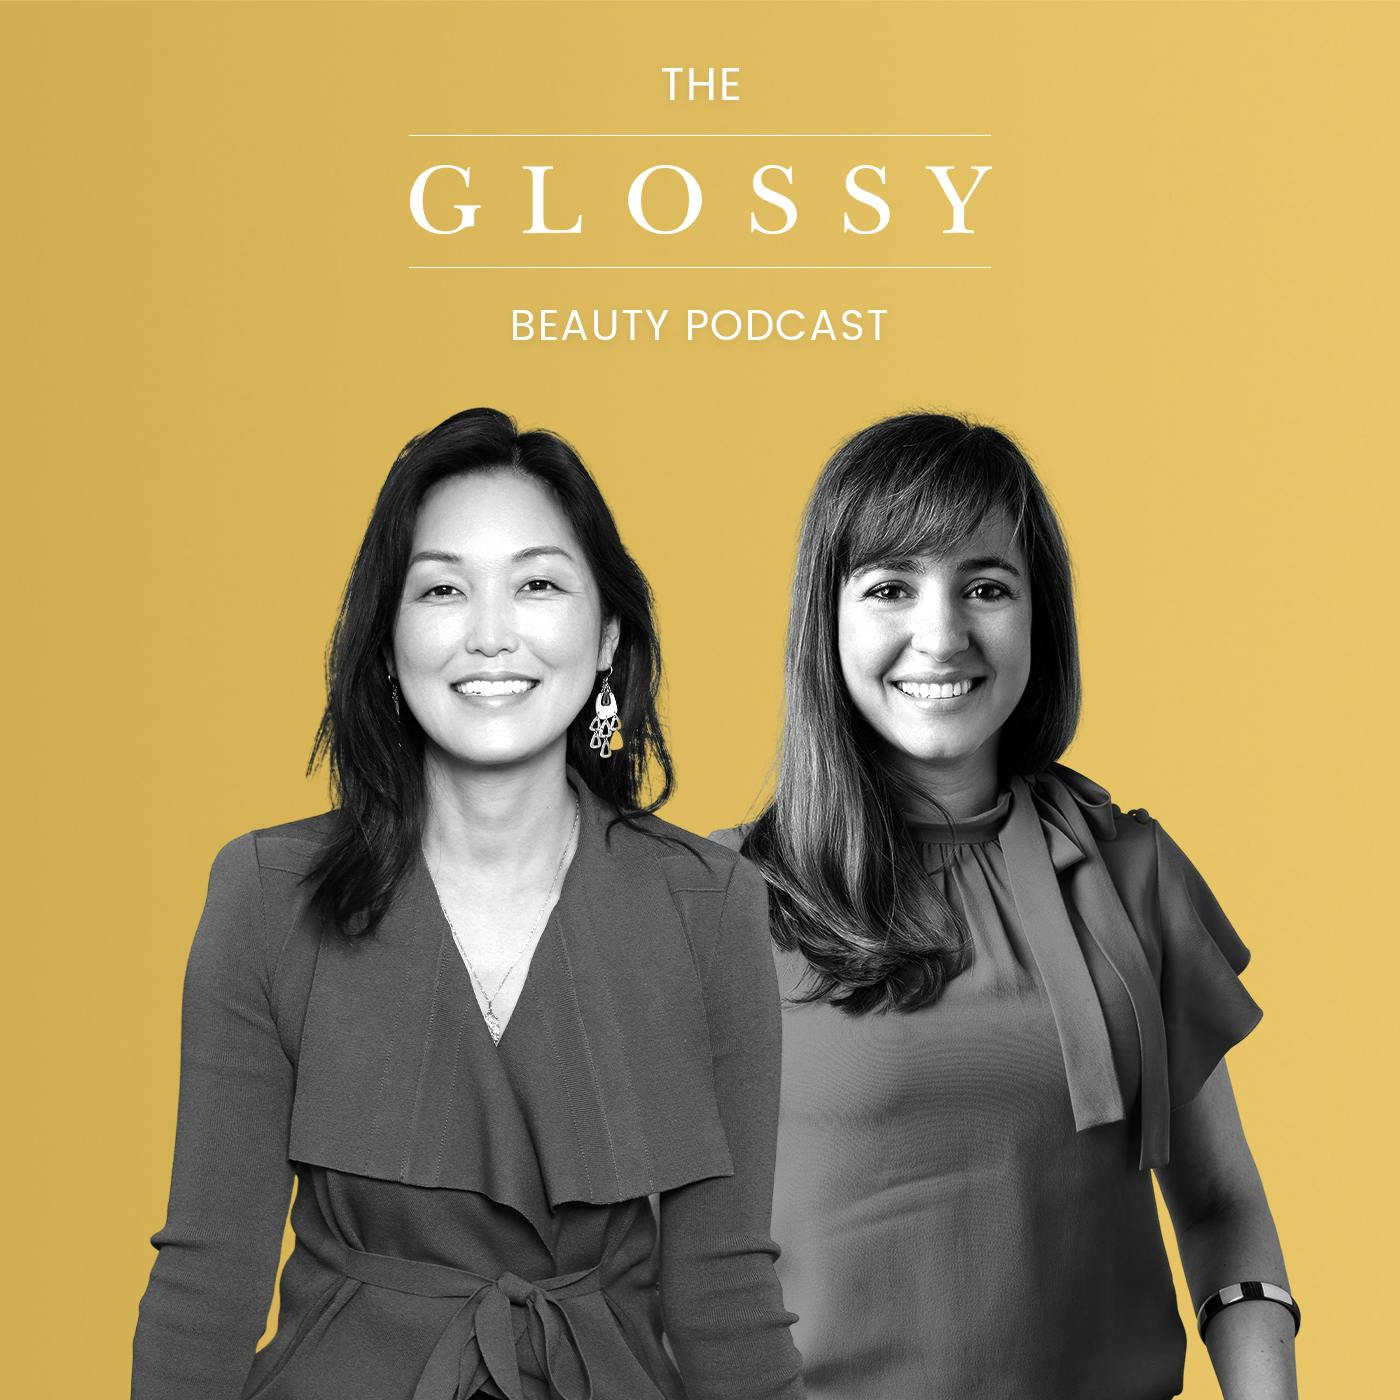 Sol de Janeiro's Heela Yang and Camila Pierotti on leading the way for premium body products